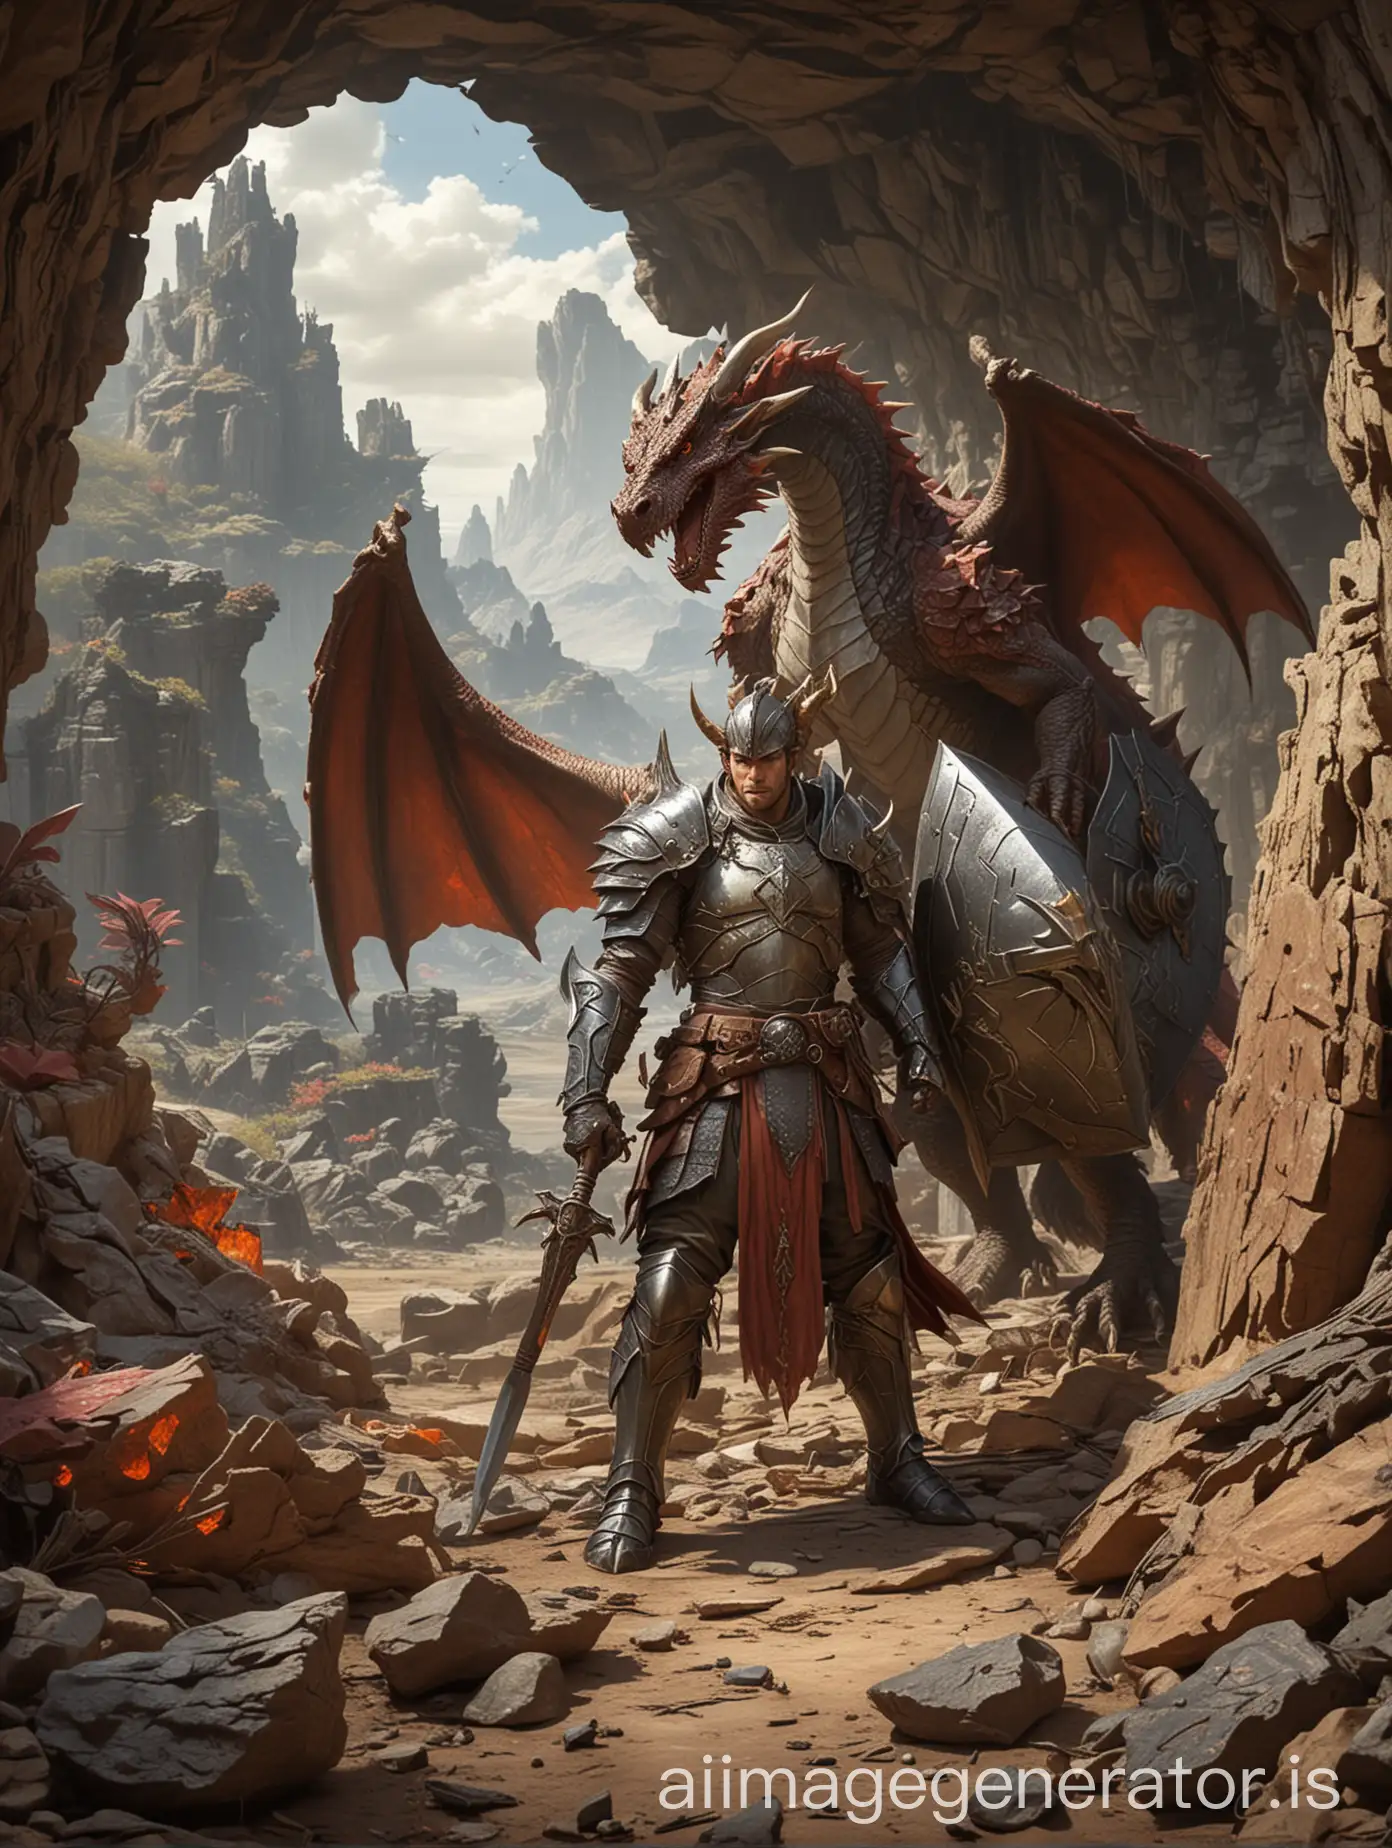 A dragon hunter with special armor, holding a long spear and large shield, stands next to a defeated dragon, with a cave full of treasure in the background